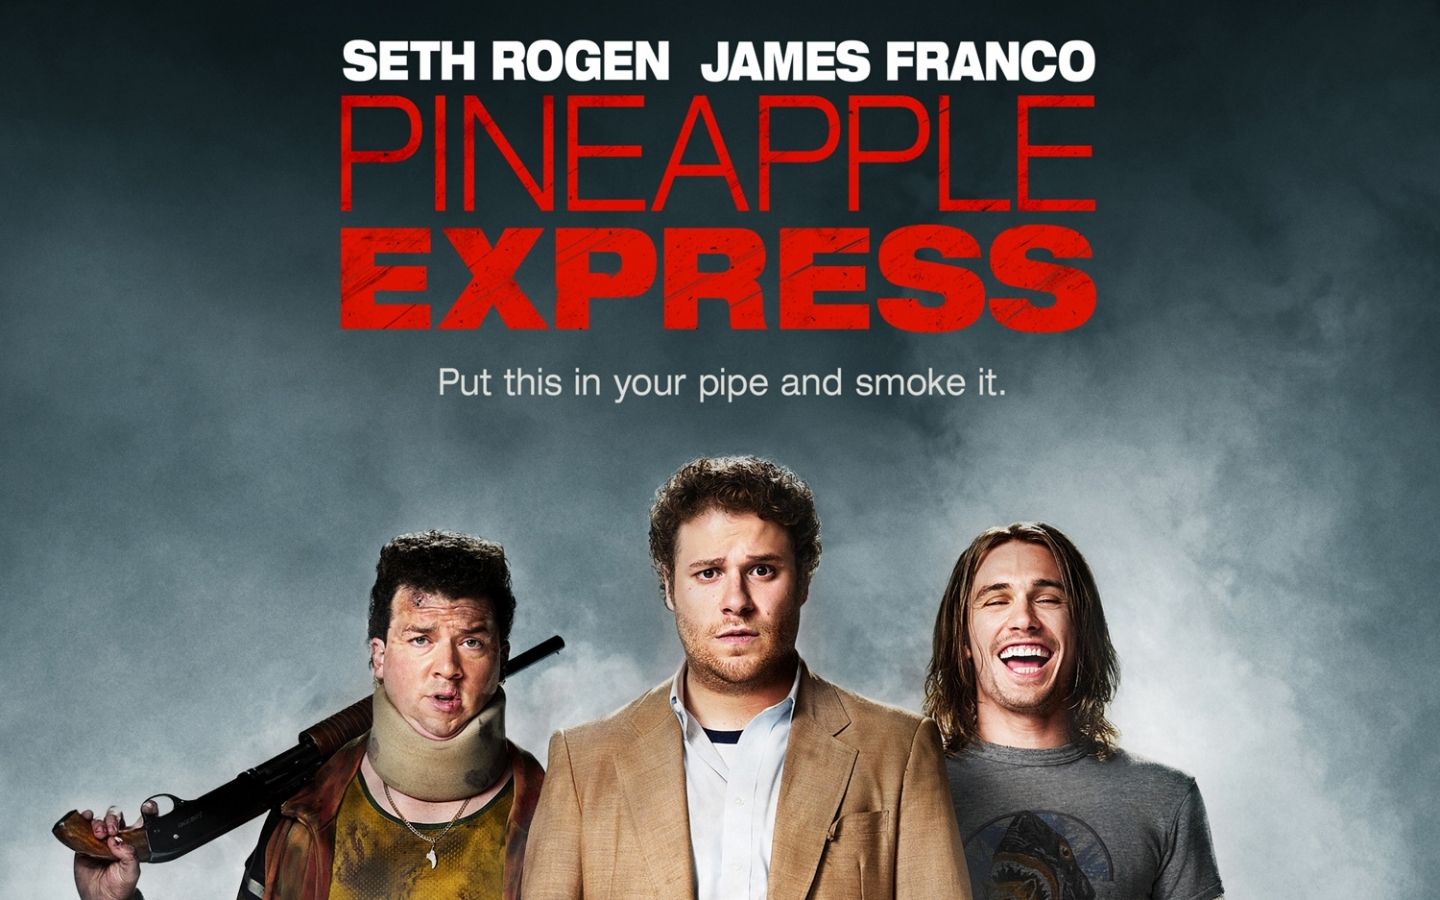 Free download pineapple express james franco movie posters seth